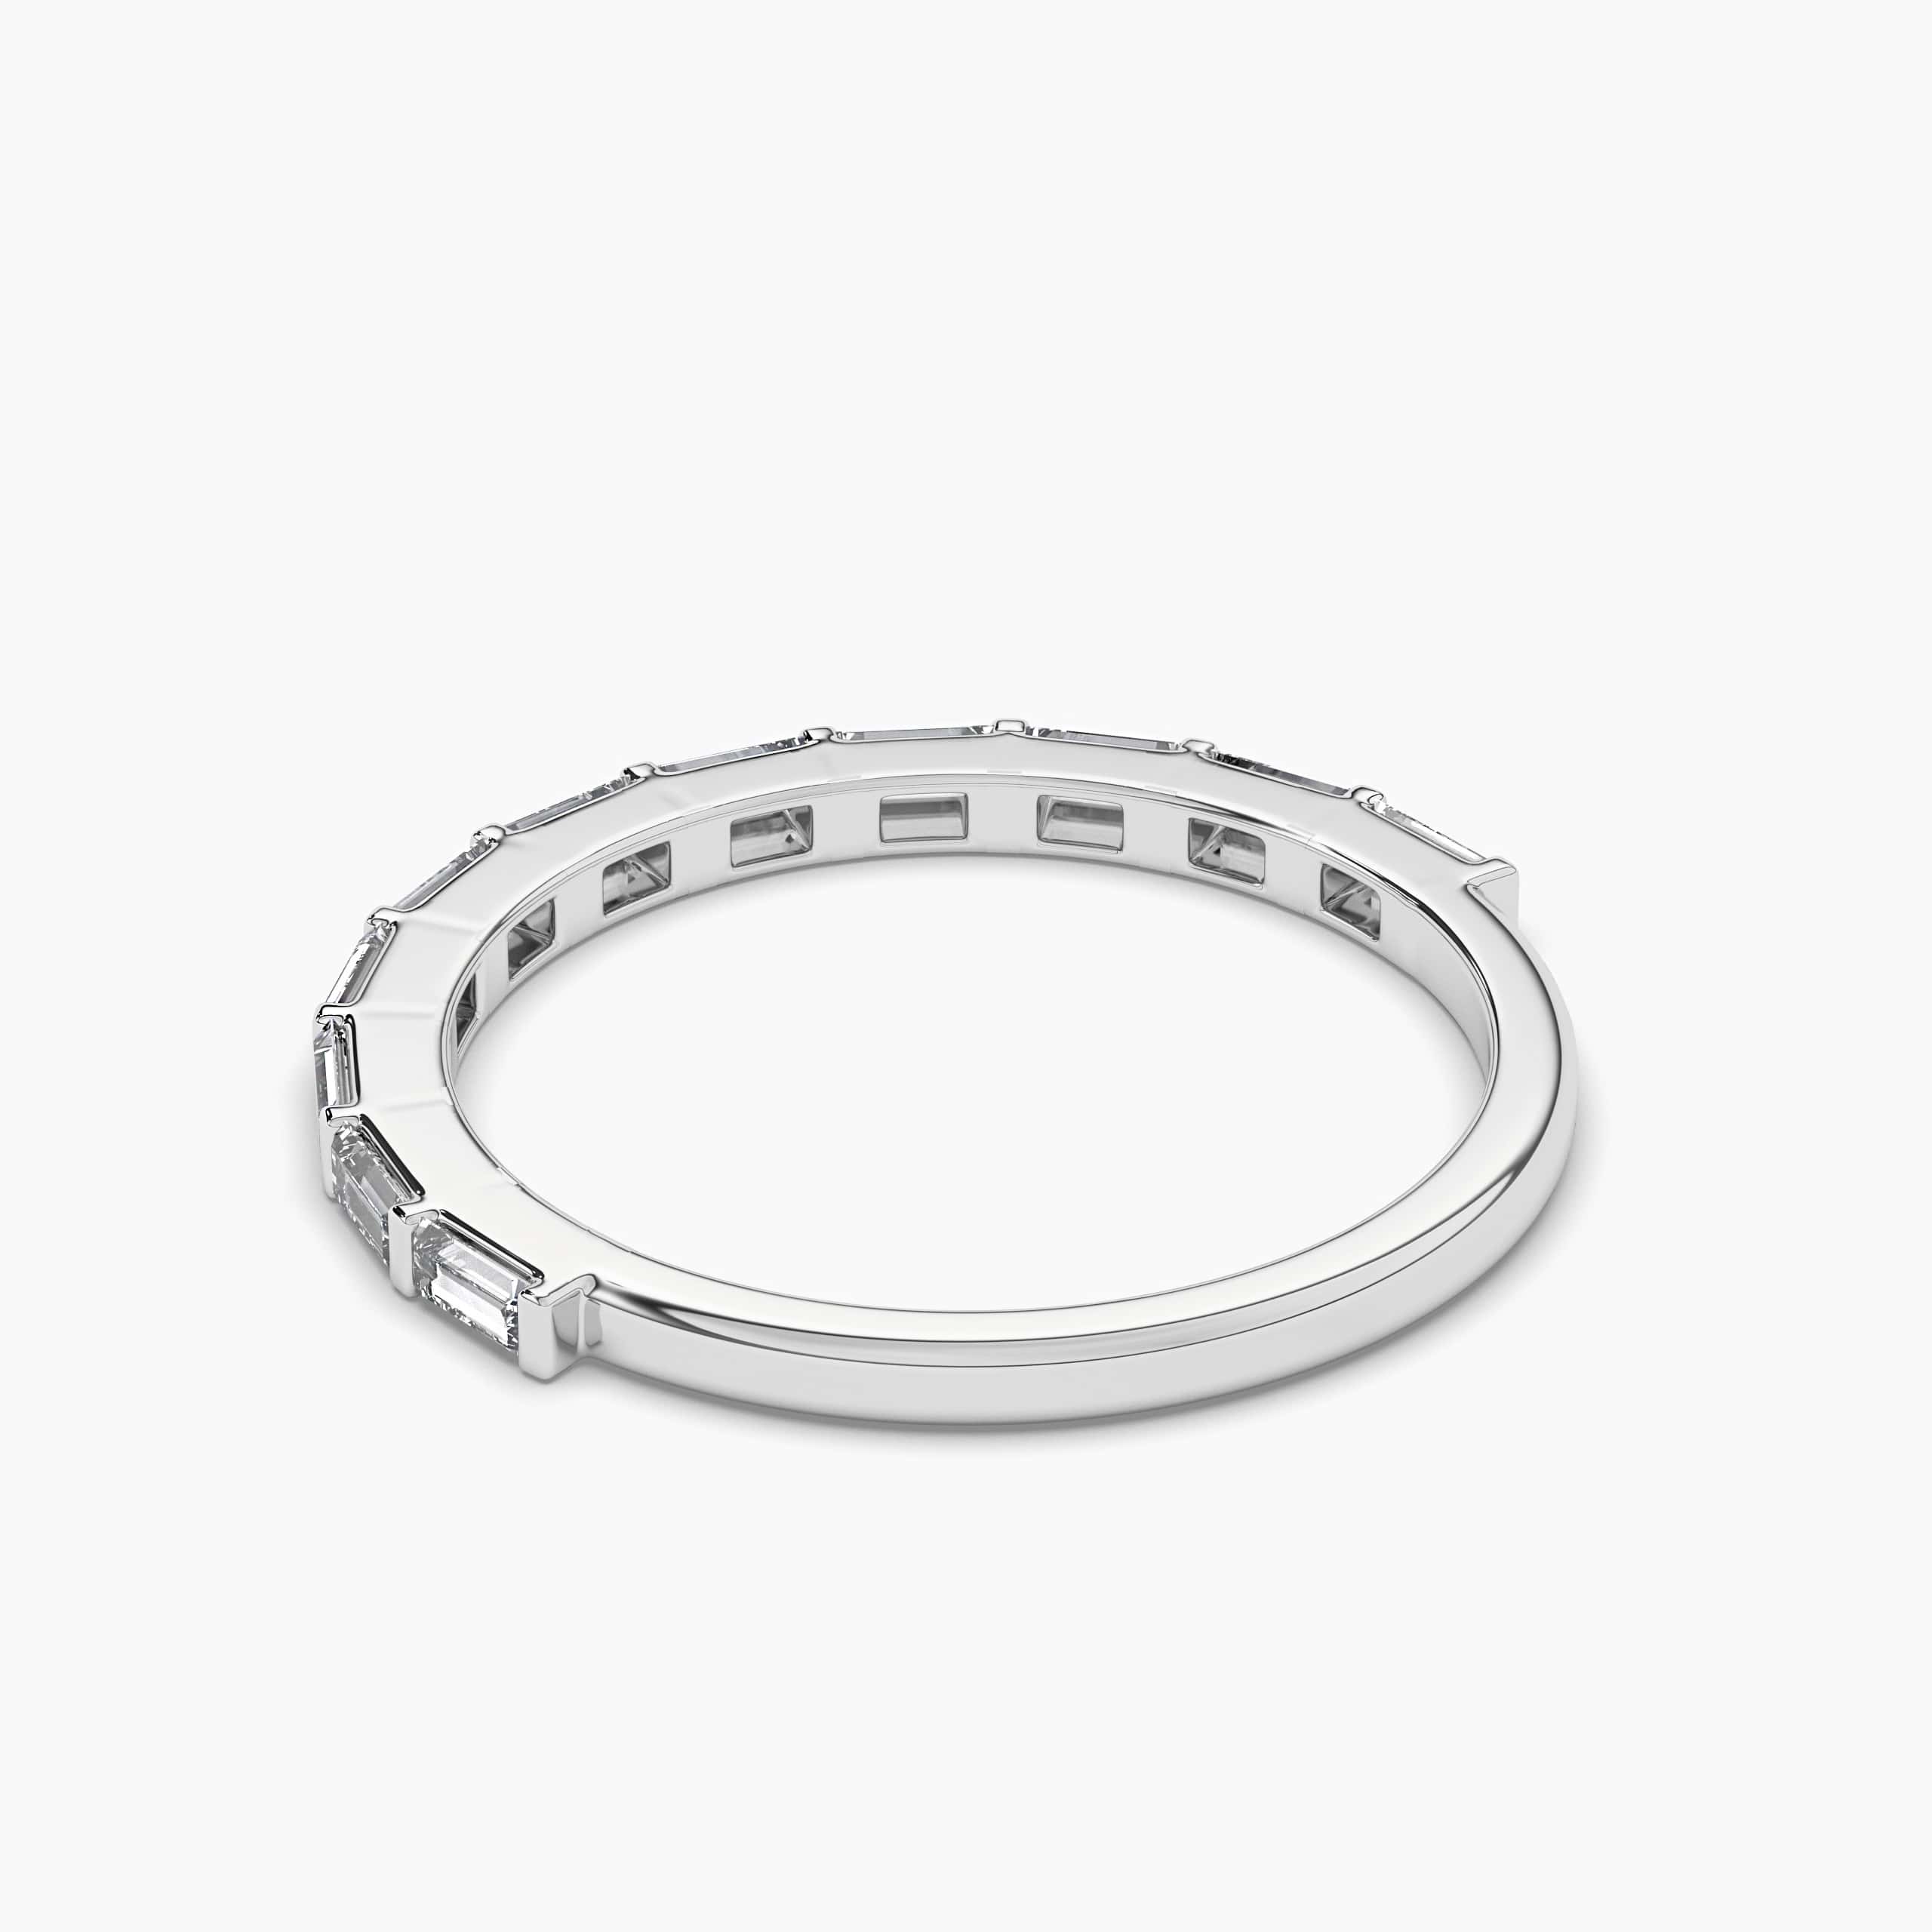 east west baguetter wedding band in white gold